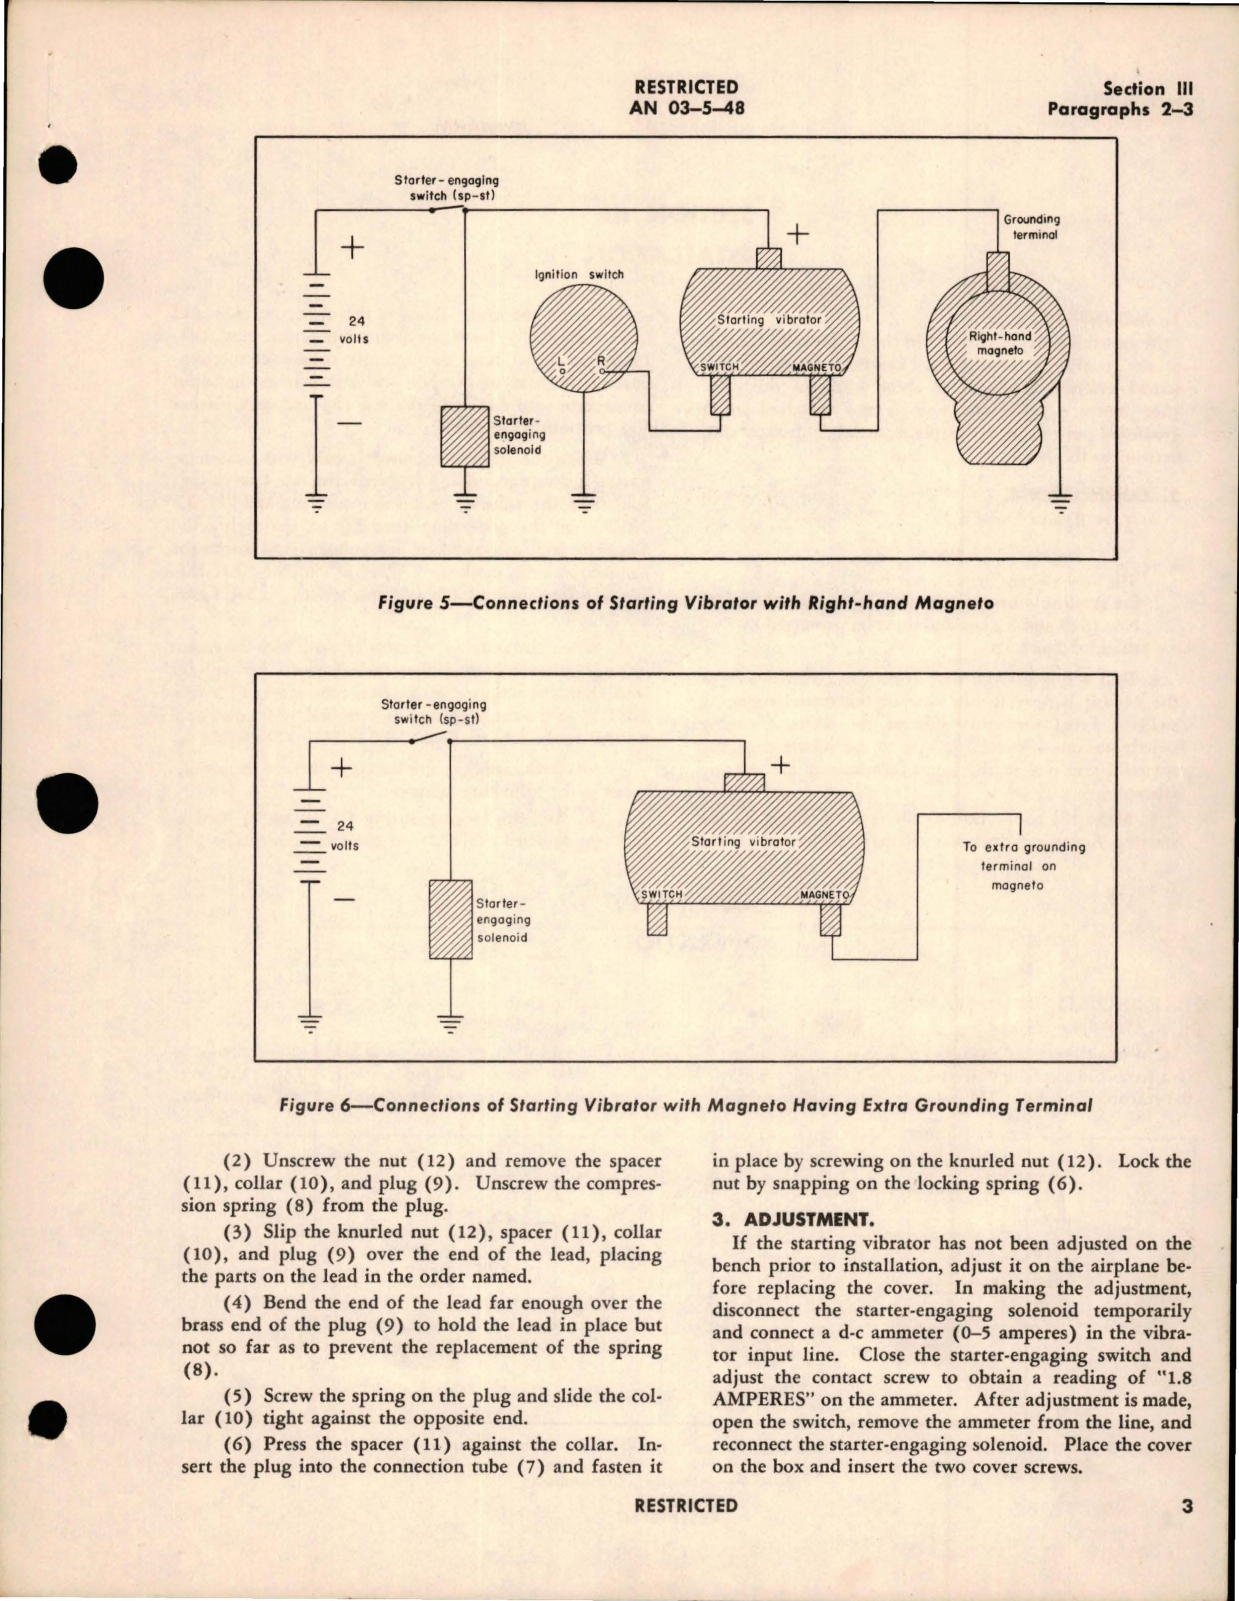 Sample page 7 from AirCorps Library document: Instructions with Parts Catalog for Starting Vibrators - Parts 70G7 and 70G7G3 